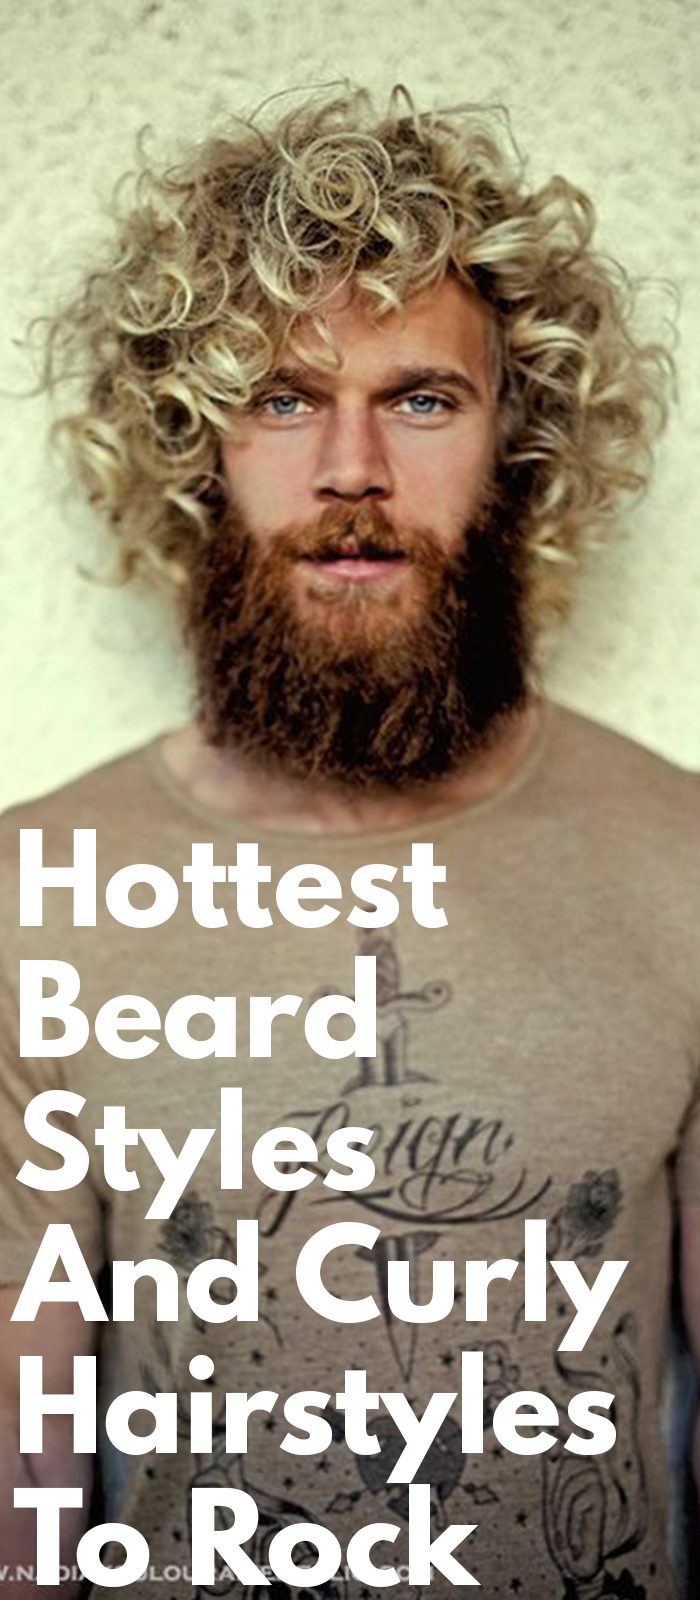 Hottest Beard Styles And Curly Hairstyles To Rock! ⋆ Best Fashion Blog For  Men 